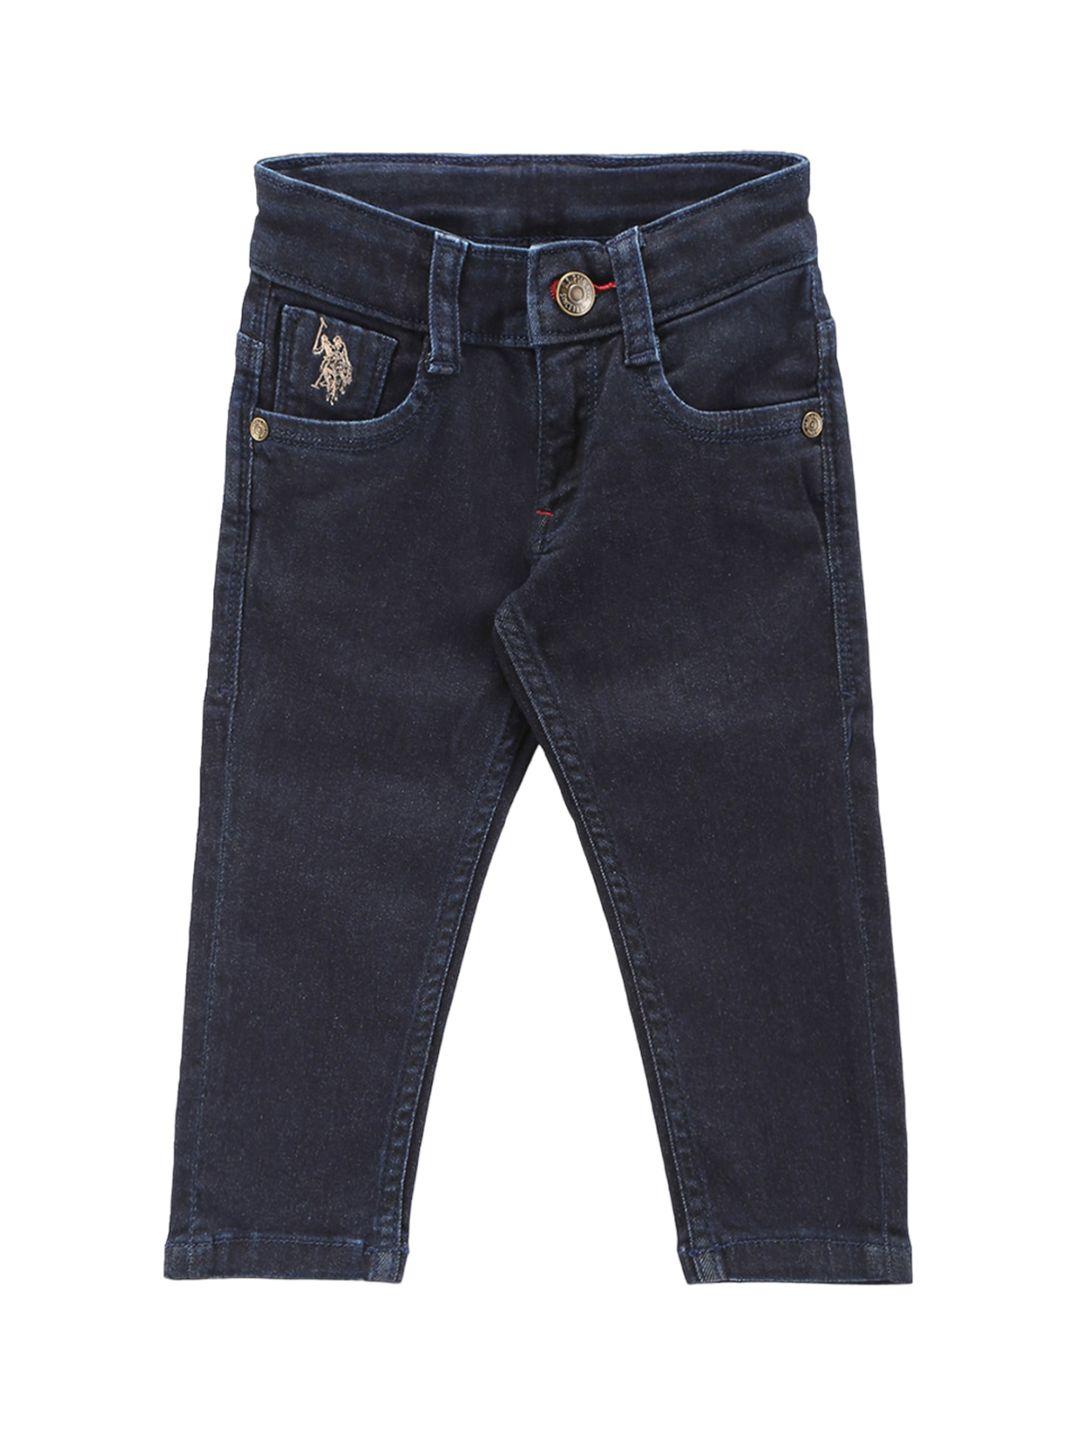 u.s. polo assn. kids infant boys mid-rise slim fit light fade stretchable jeans